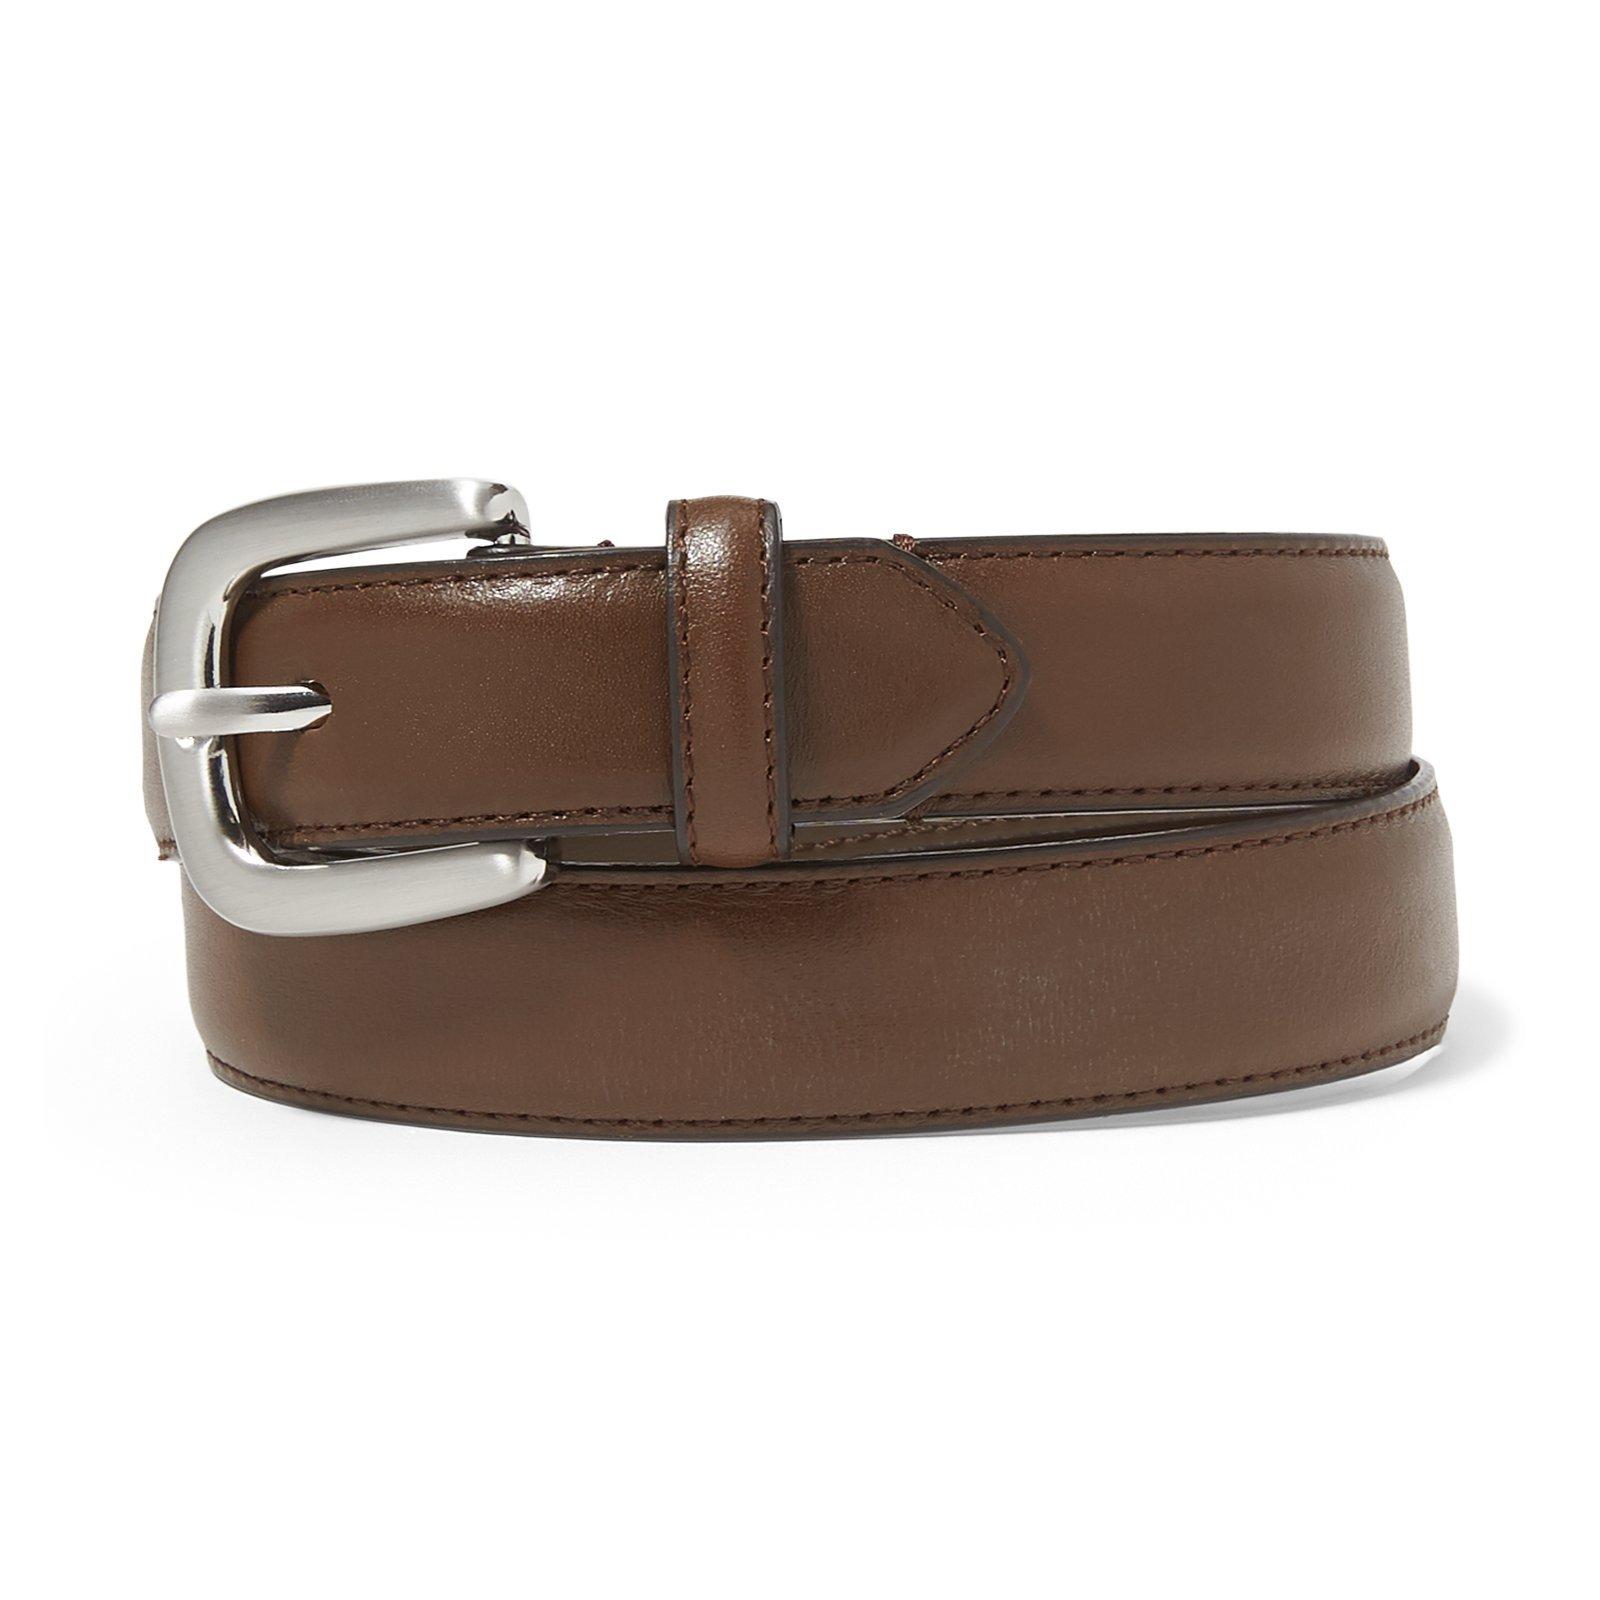 Boys Belts & Suspenders at Janie and Jack